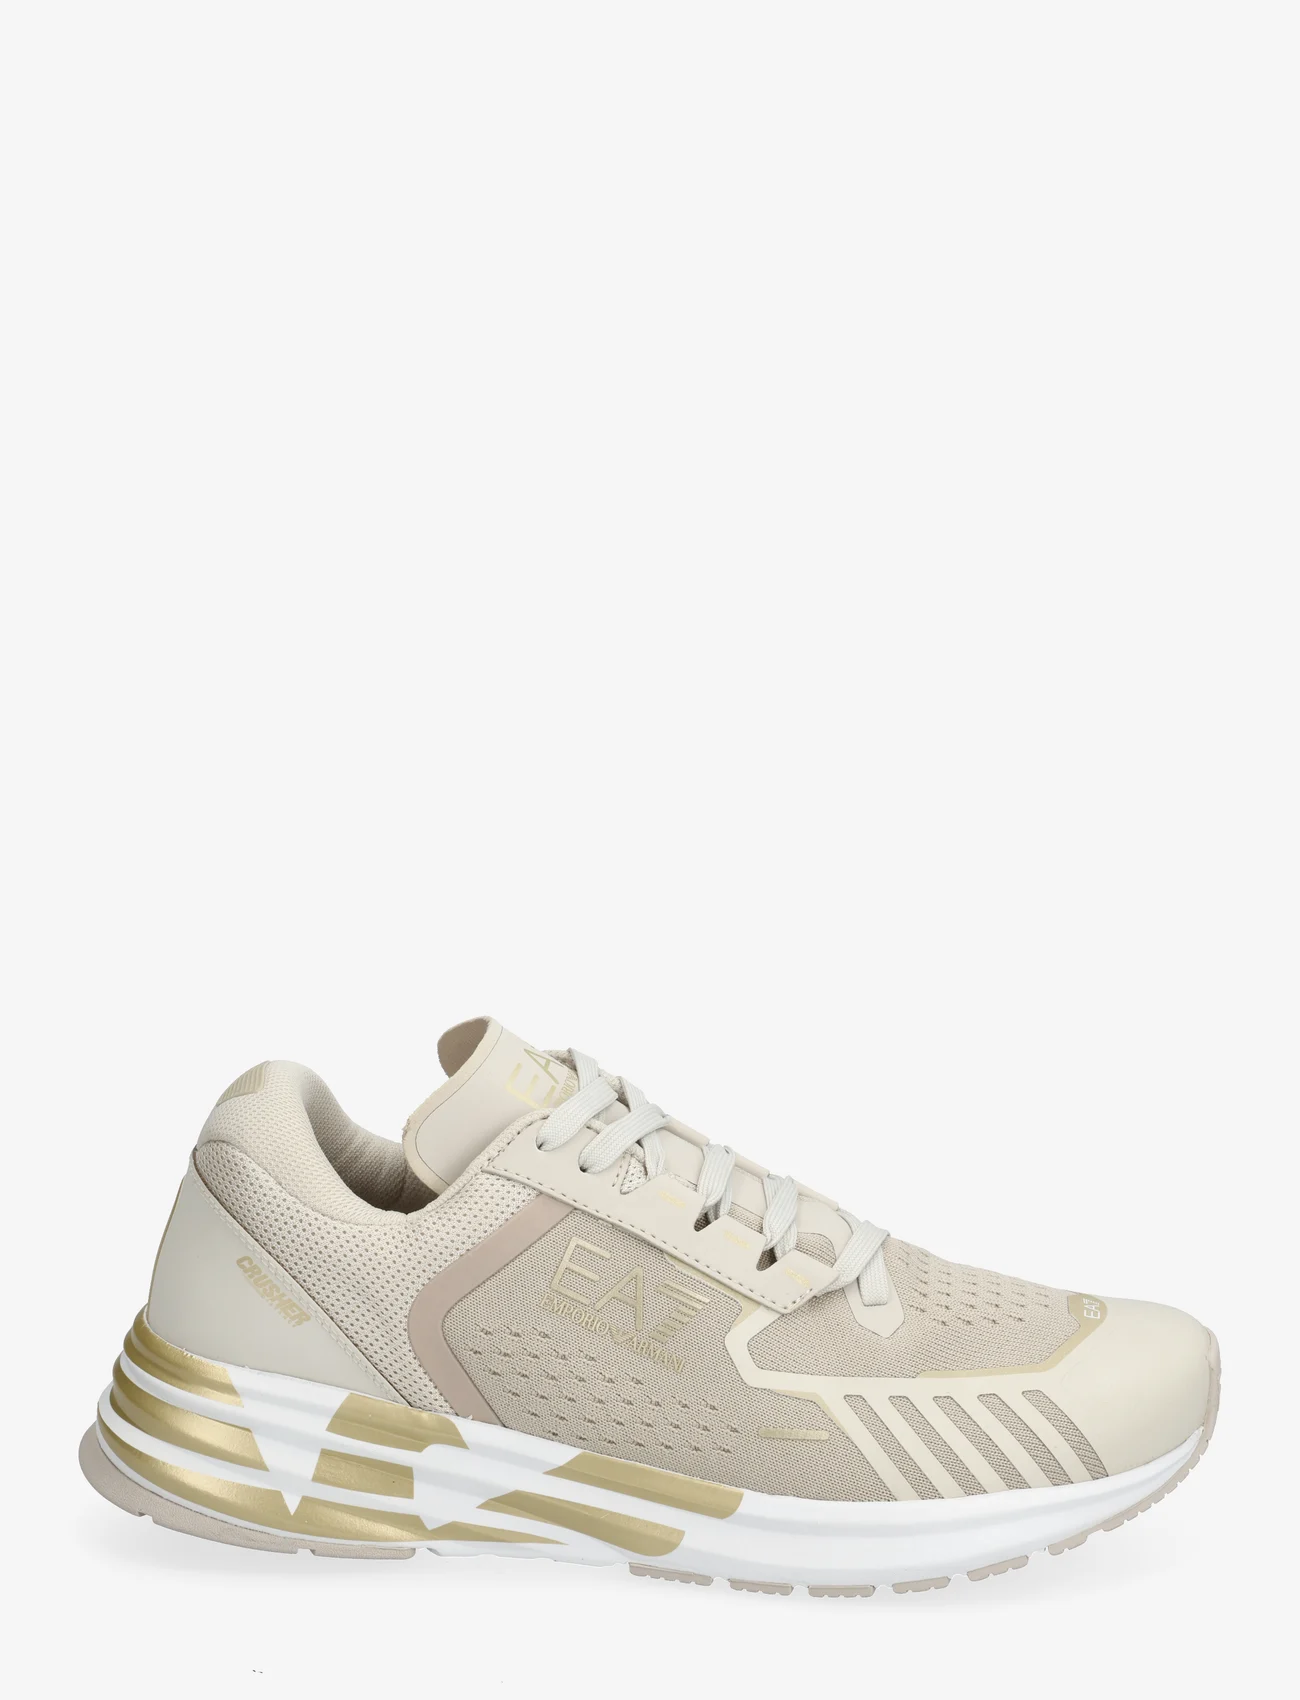 EA7 - SNEAKERS - low top sneakers - q309-rainy day+gold - 1